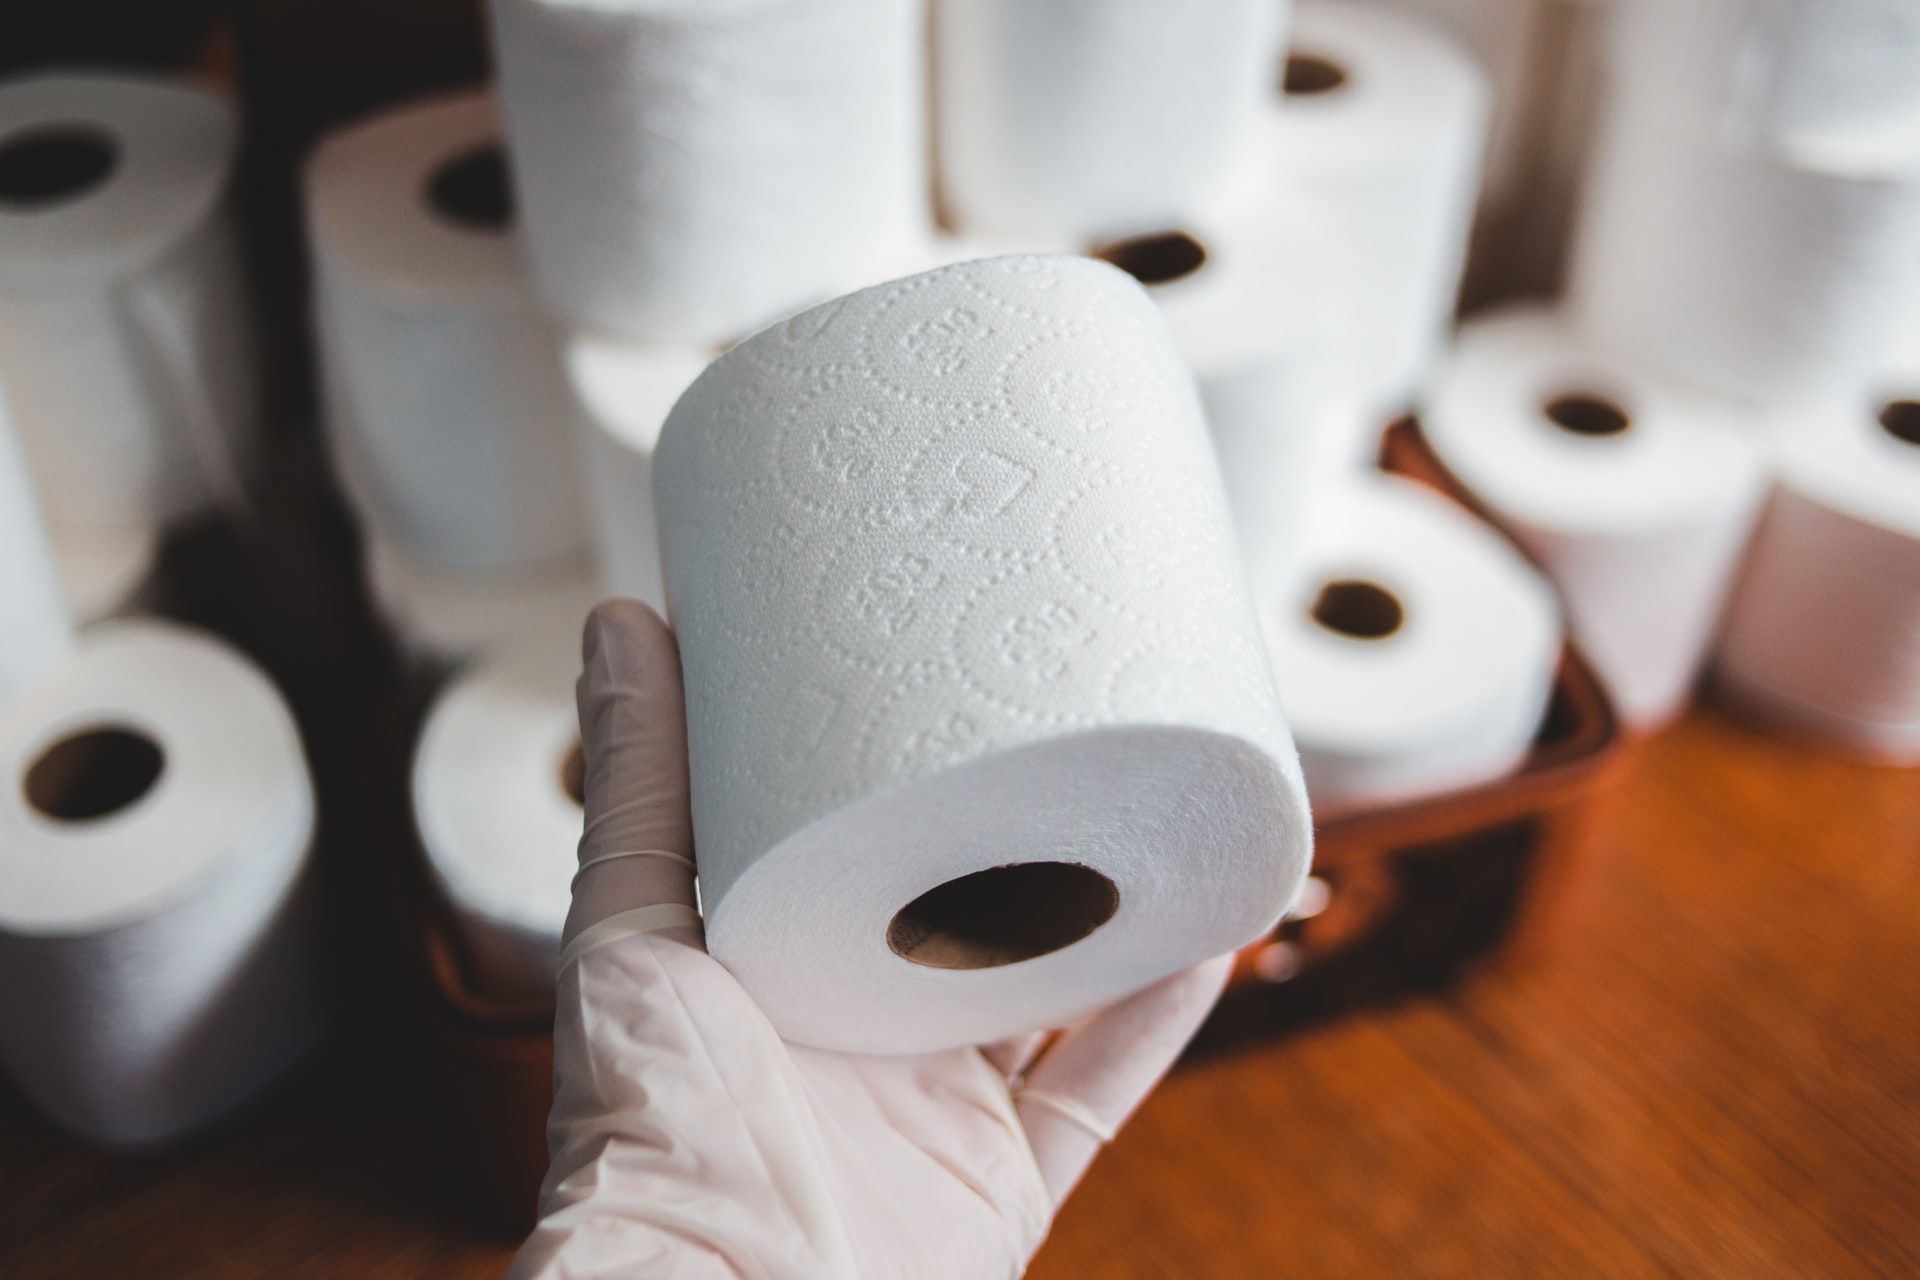 latex-gloved hand holding a roll of toilet paper 